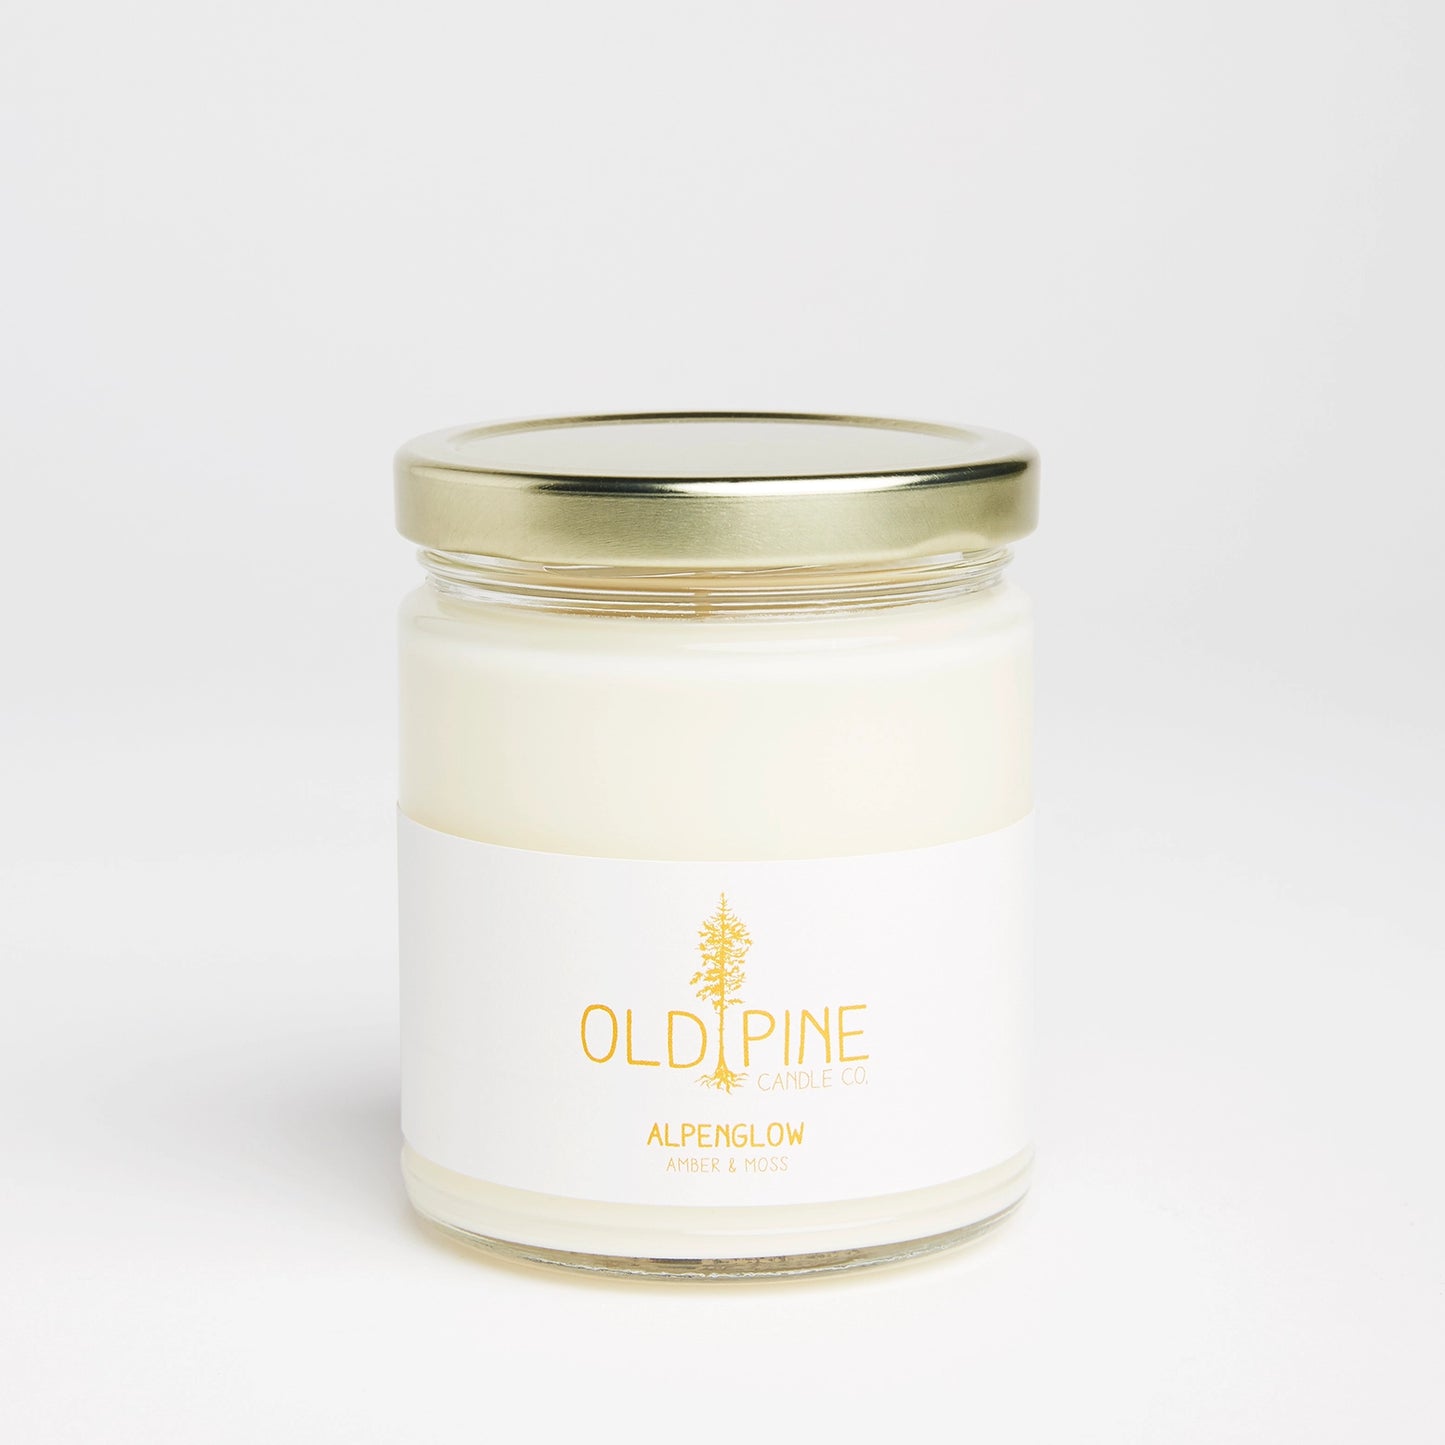 Old Pine Candle Co